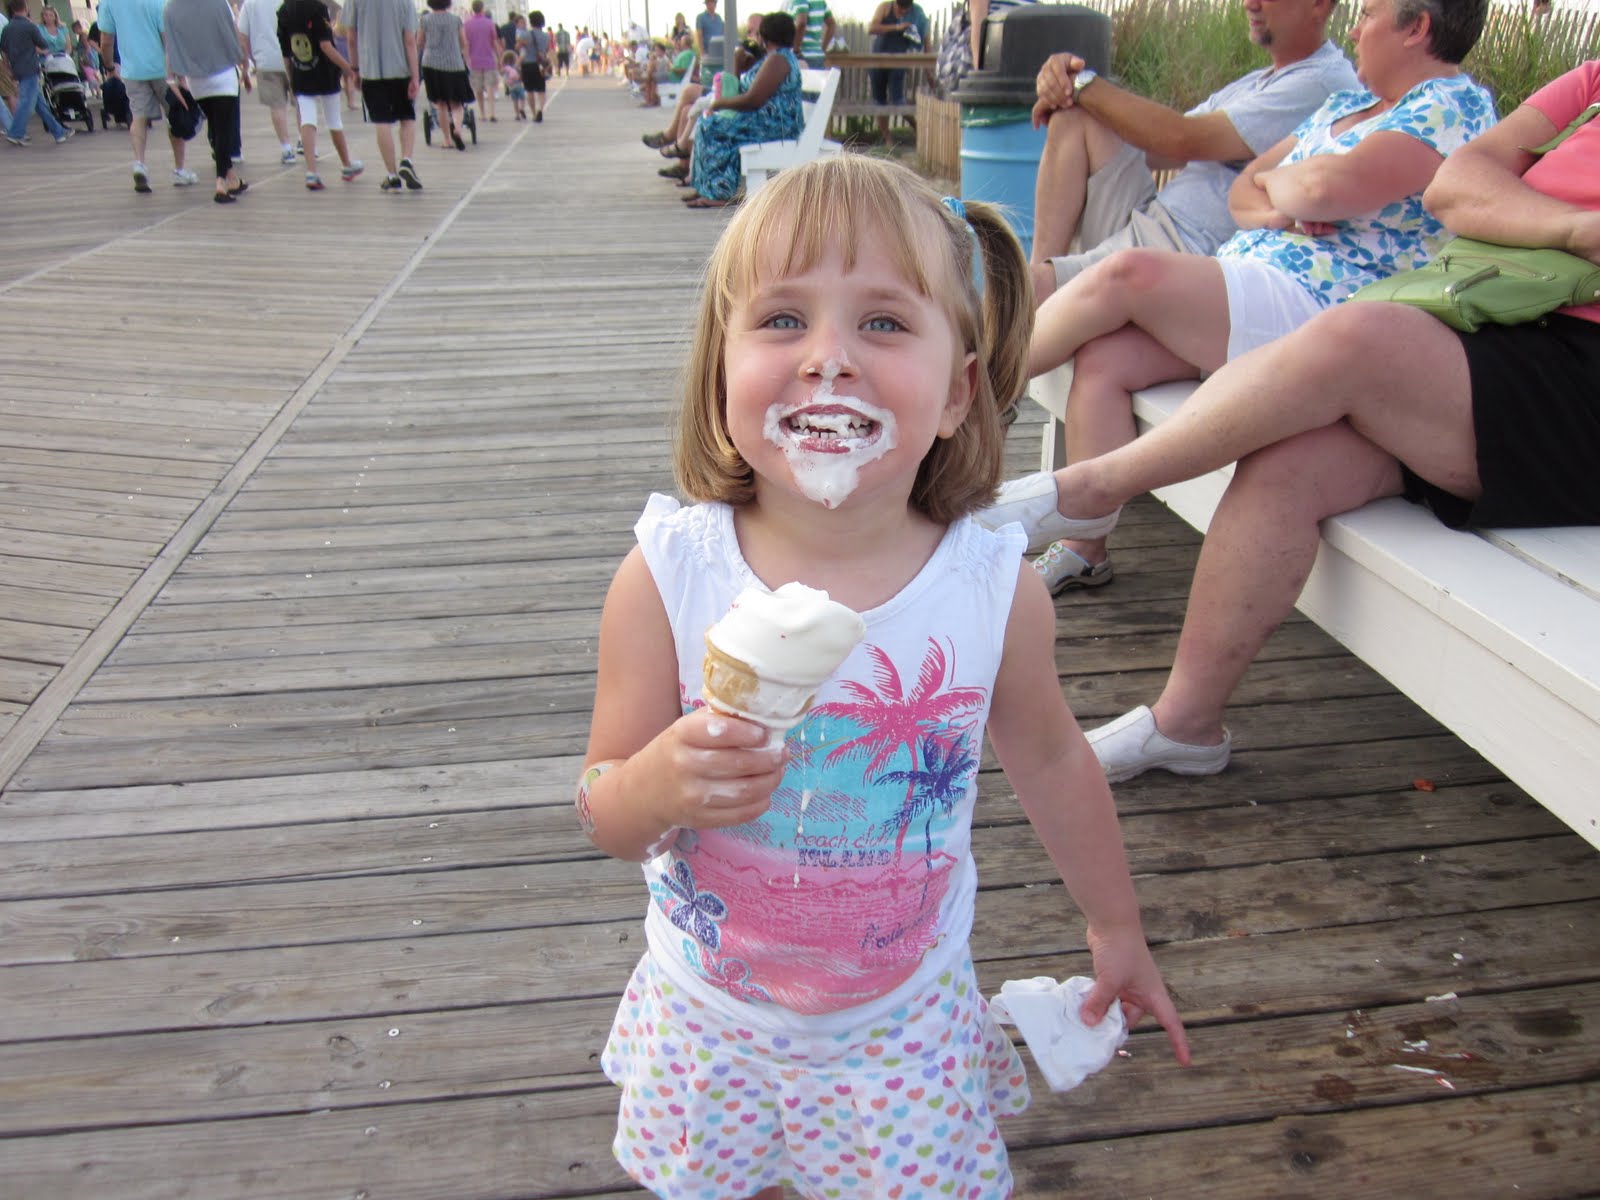 9. Little boy with blonde hair and messy face from eating ice cream - wide 2